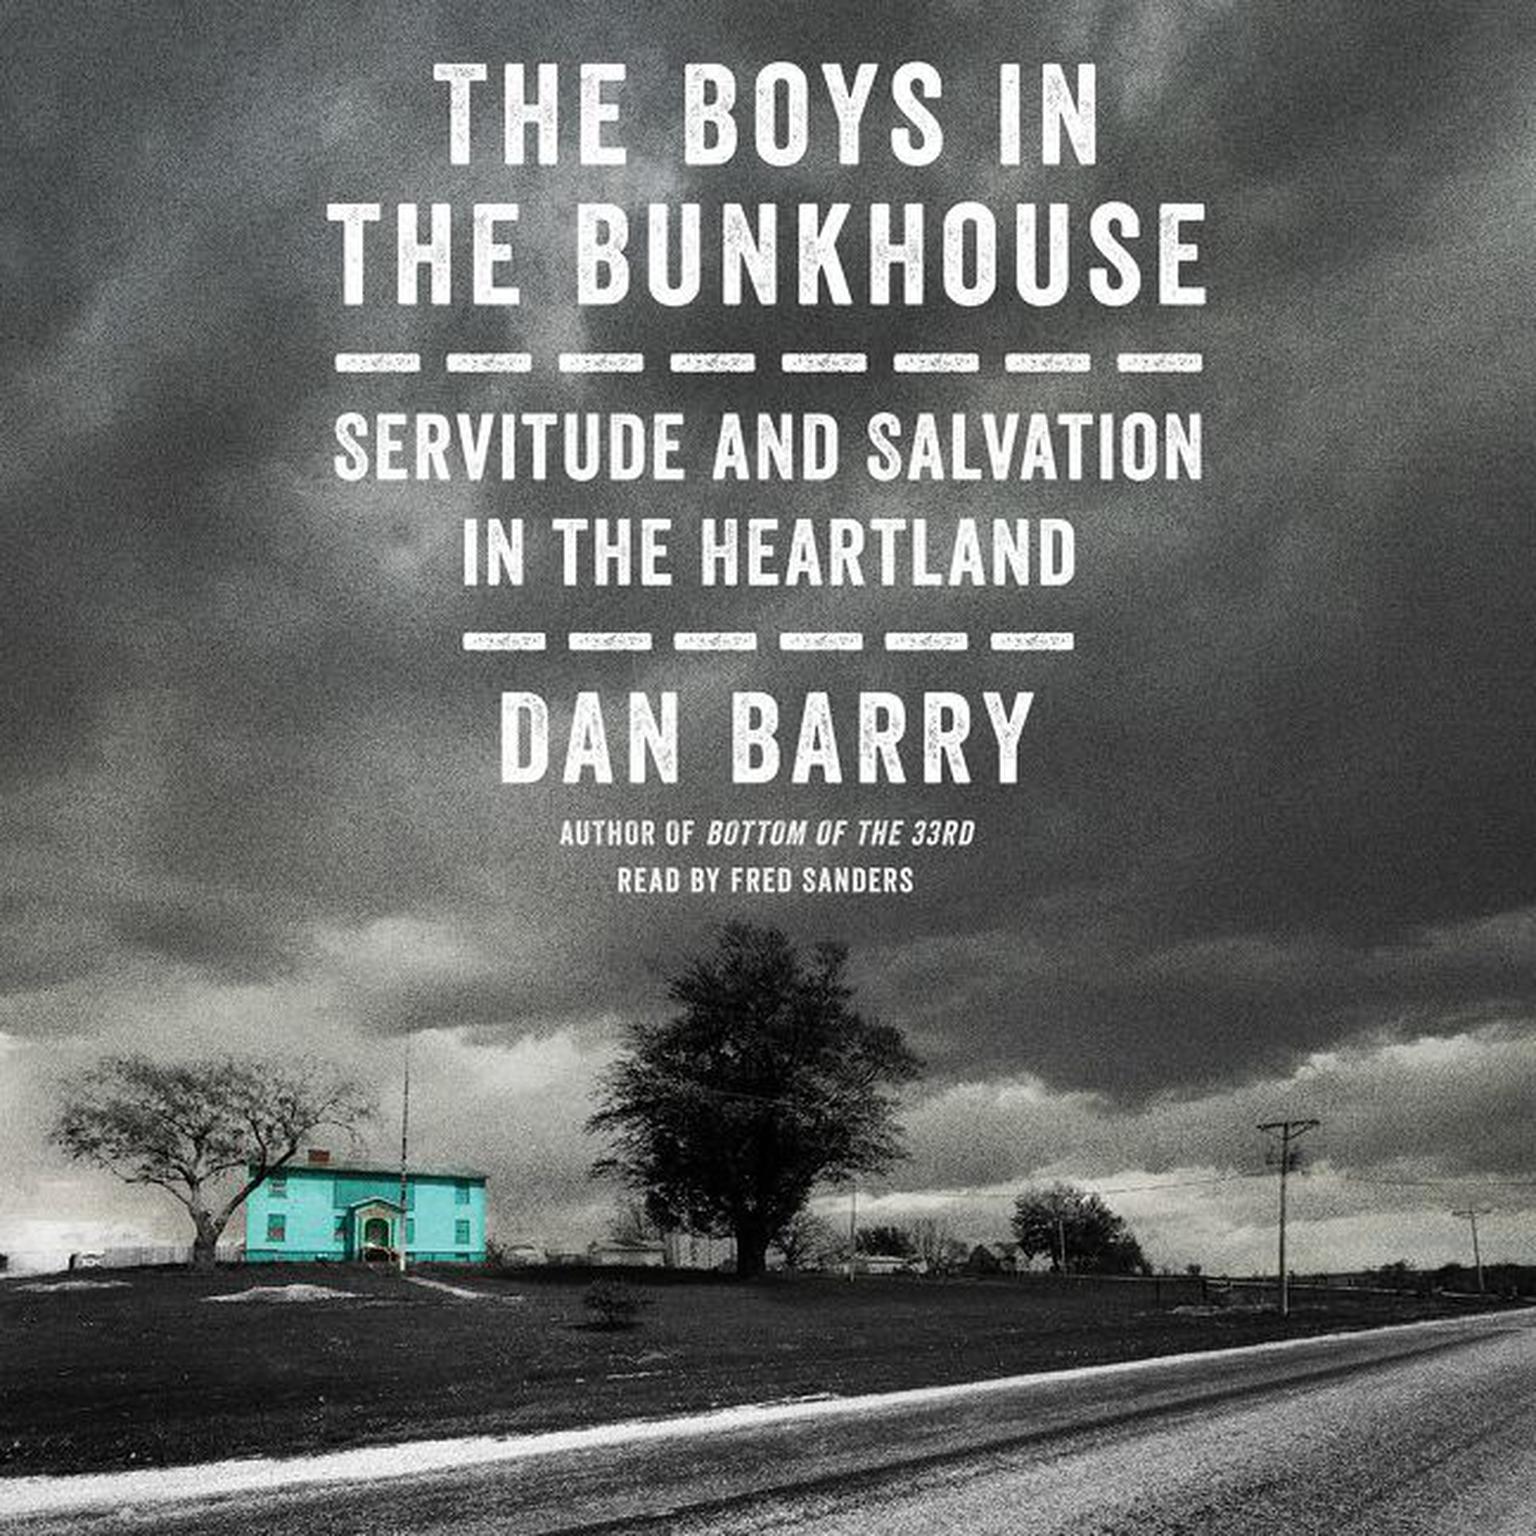 The Boys in the Bunkhouse: Servitude and Salvation in the Heartland Audiobook, by Dan Barry